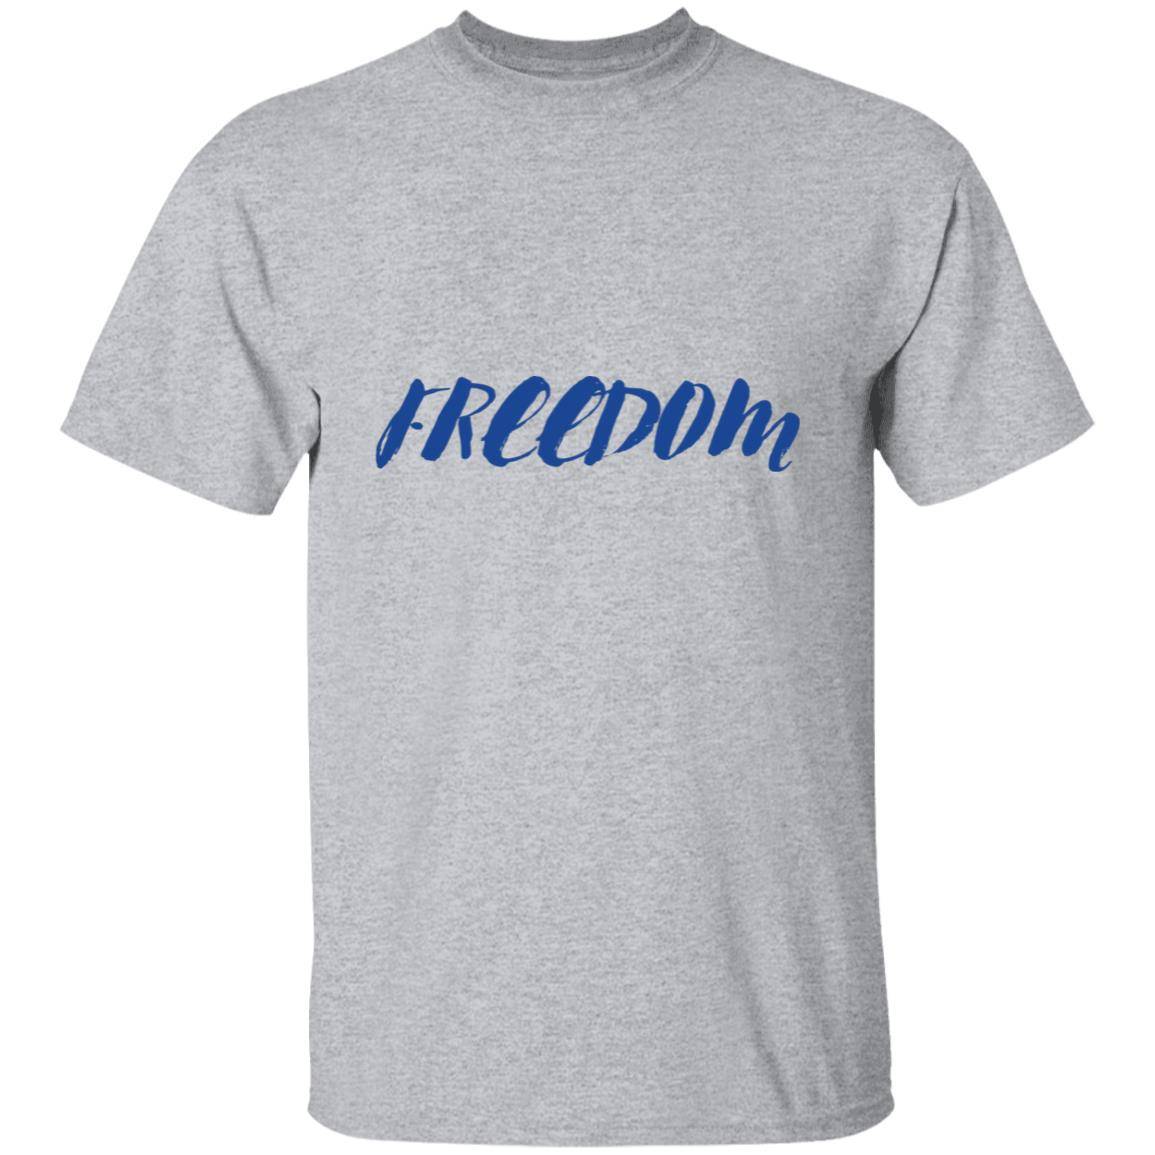 Sport gray, heavyweight classic unisex t-shirt in 100% cotton. Freedom is written across the chest front.